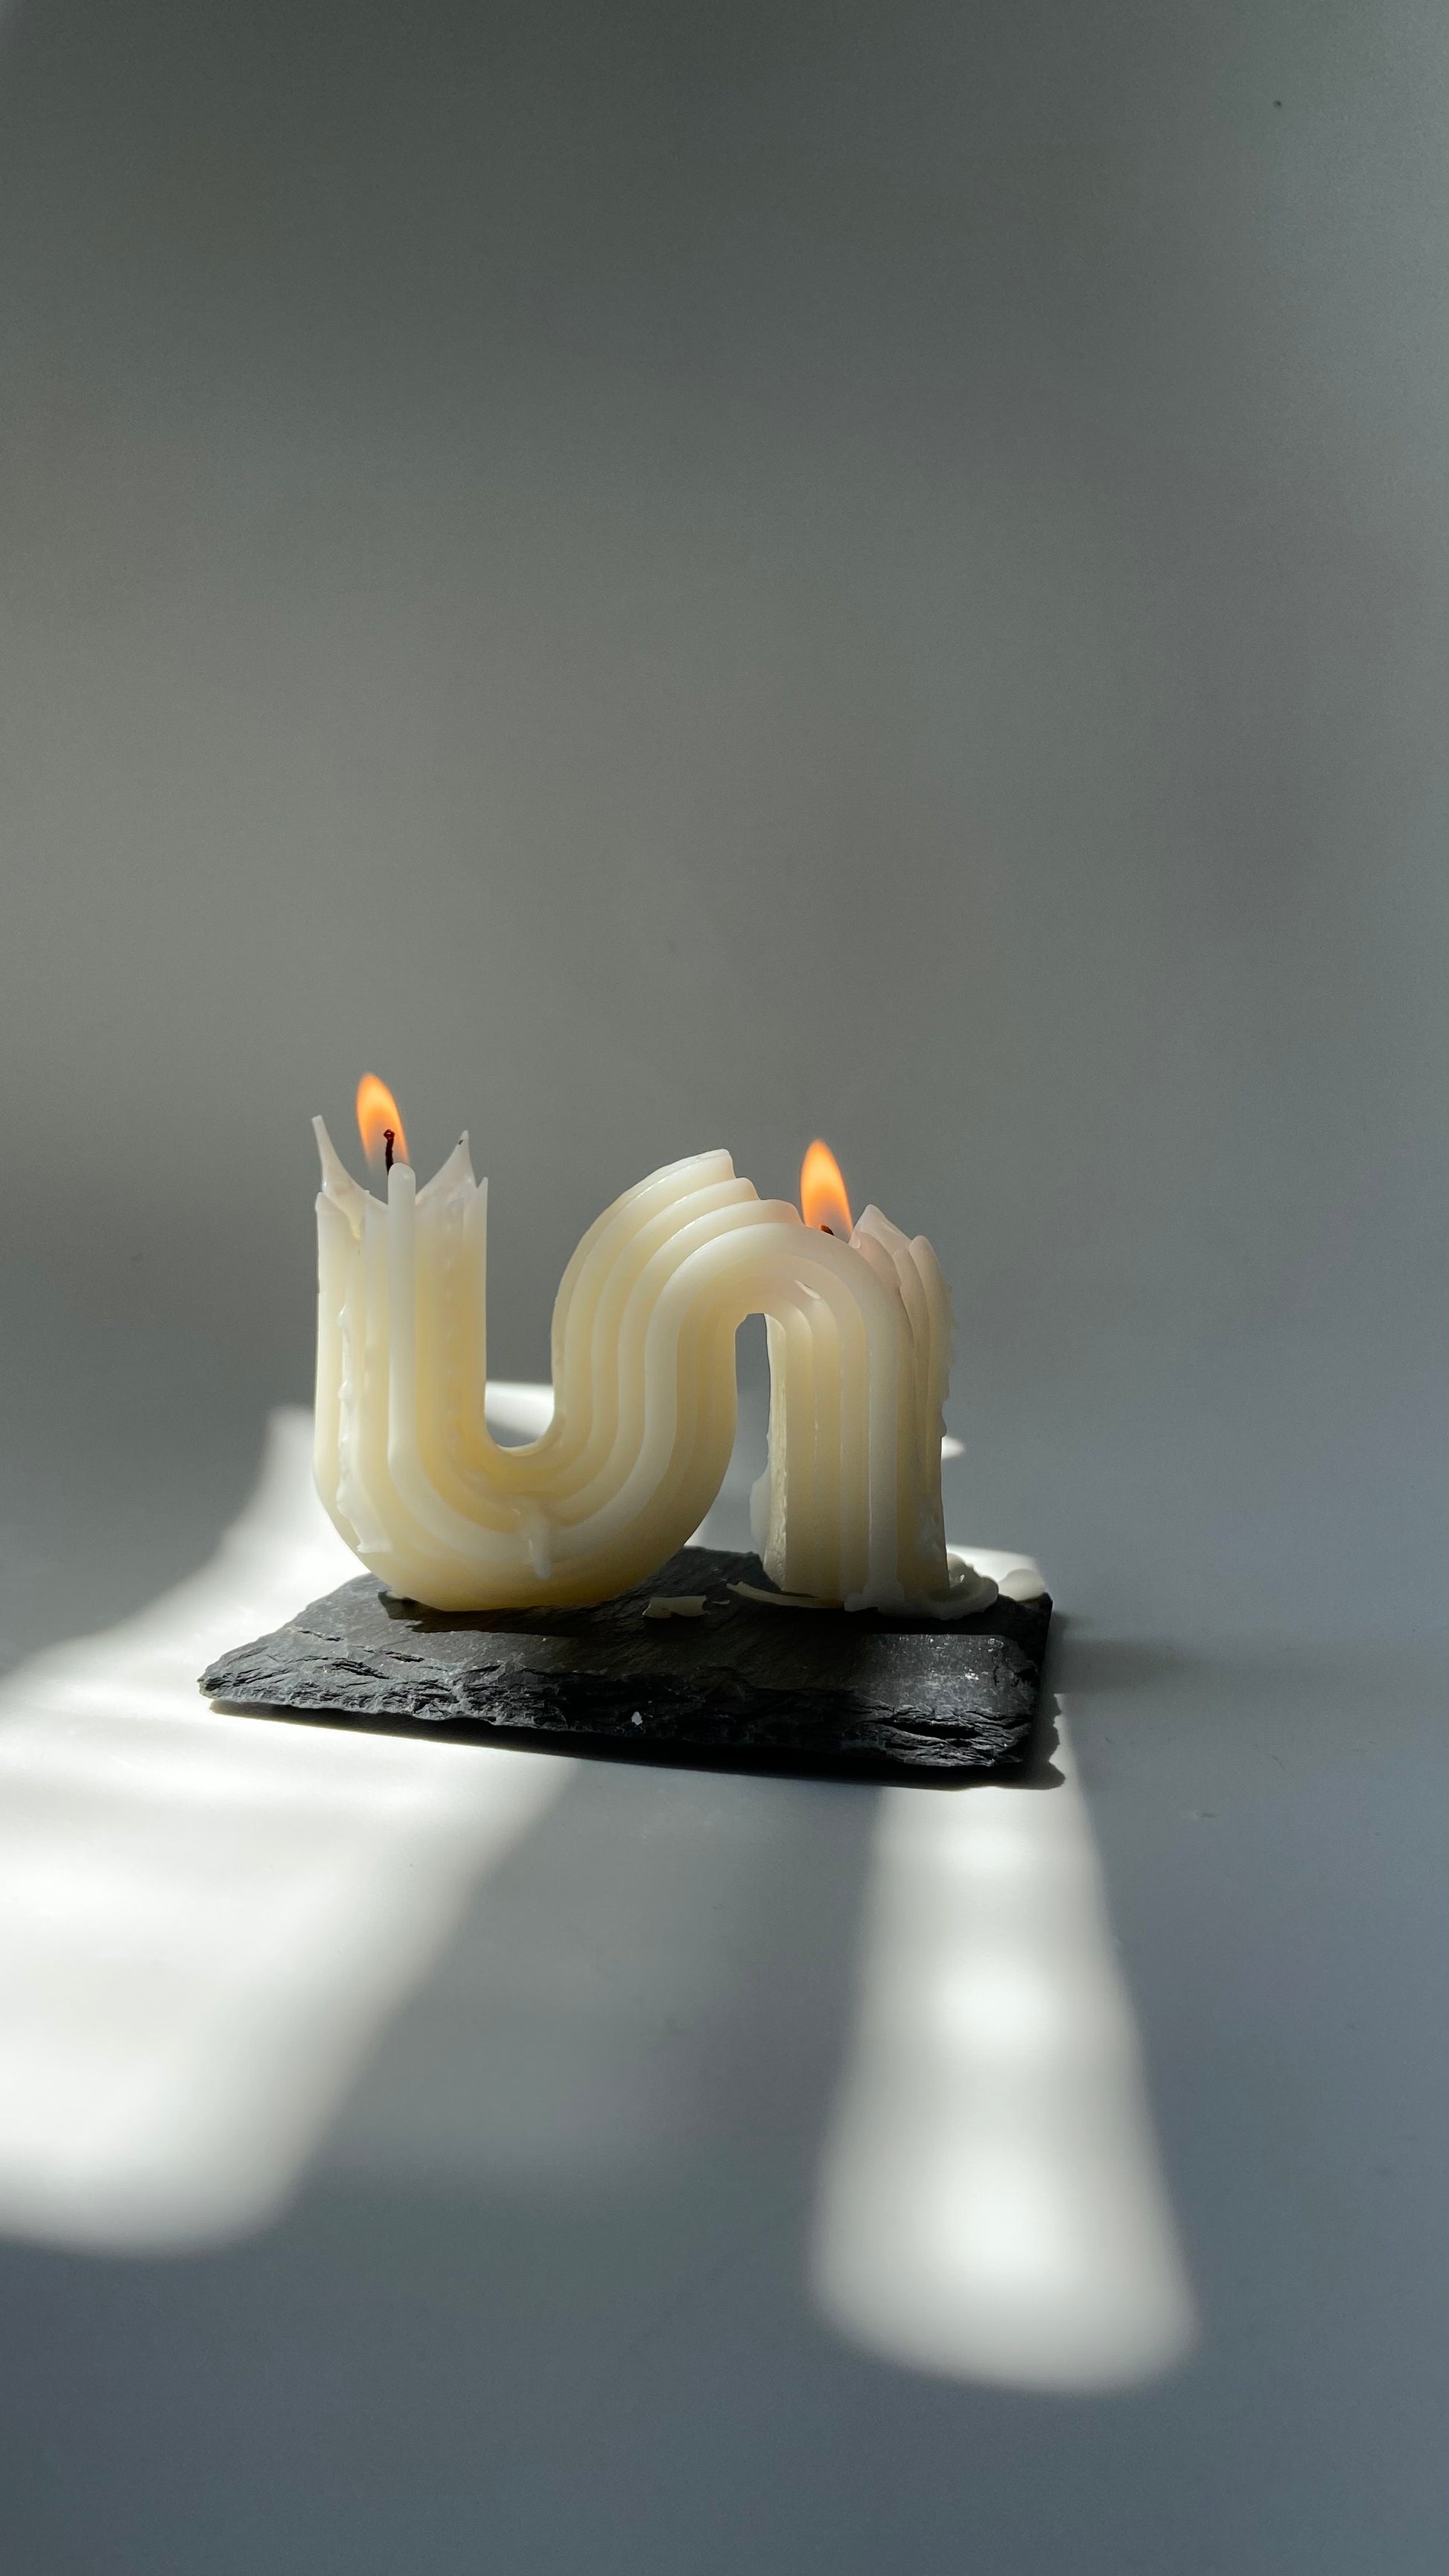 A picture of the ivory colour  s-shaped candle burning